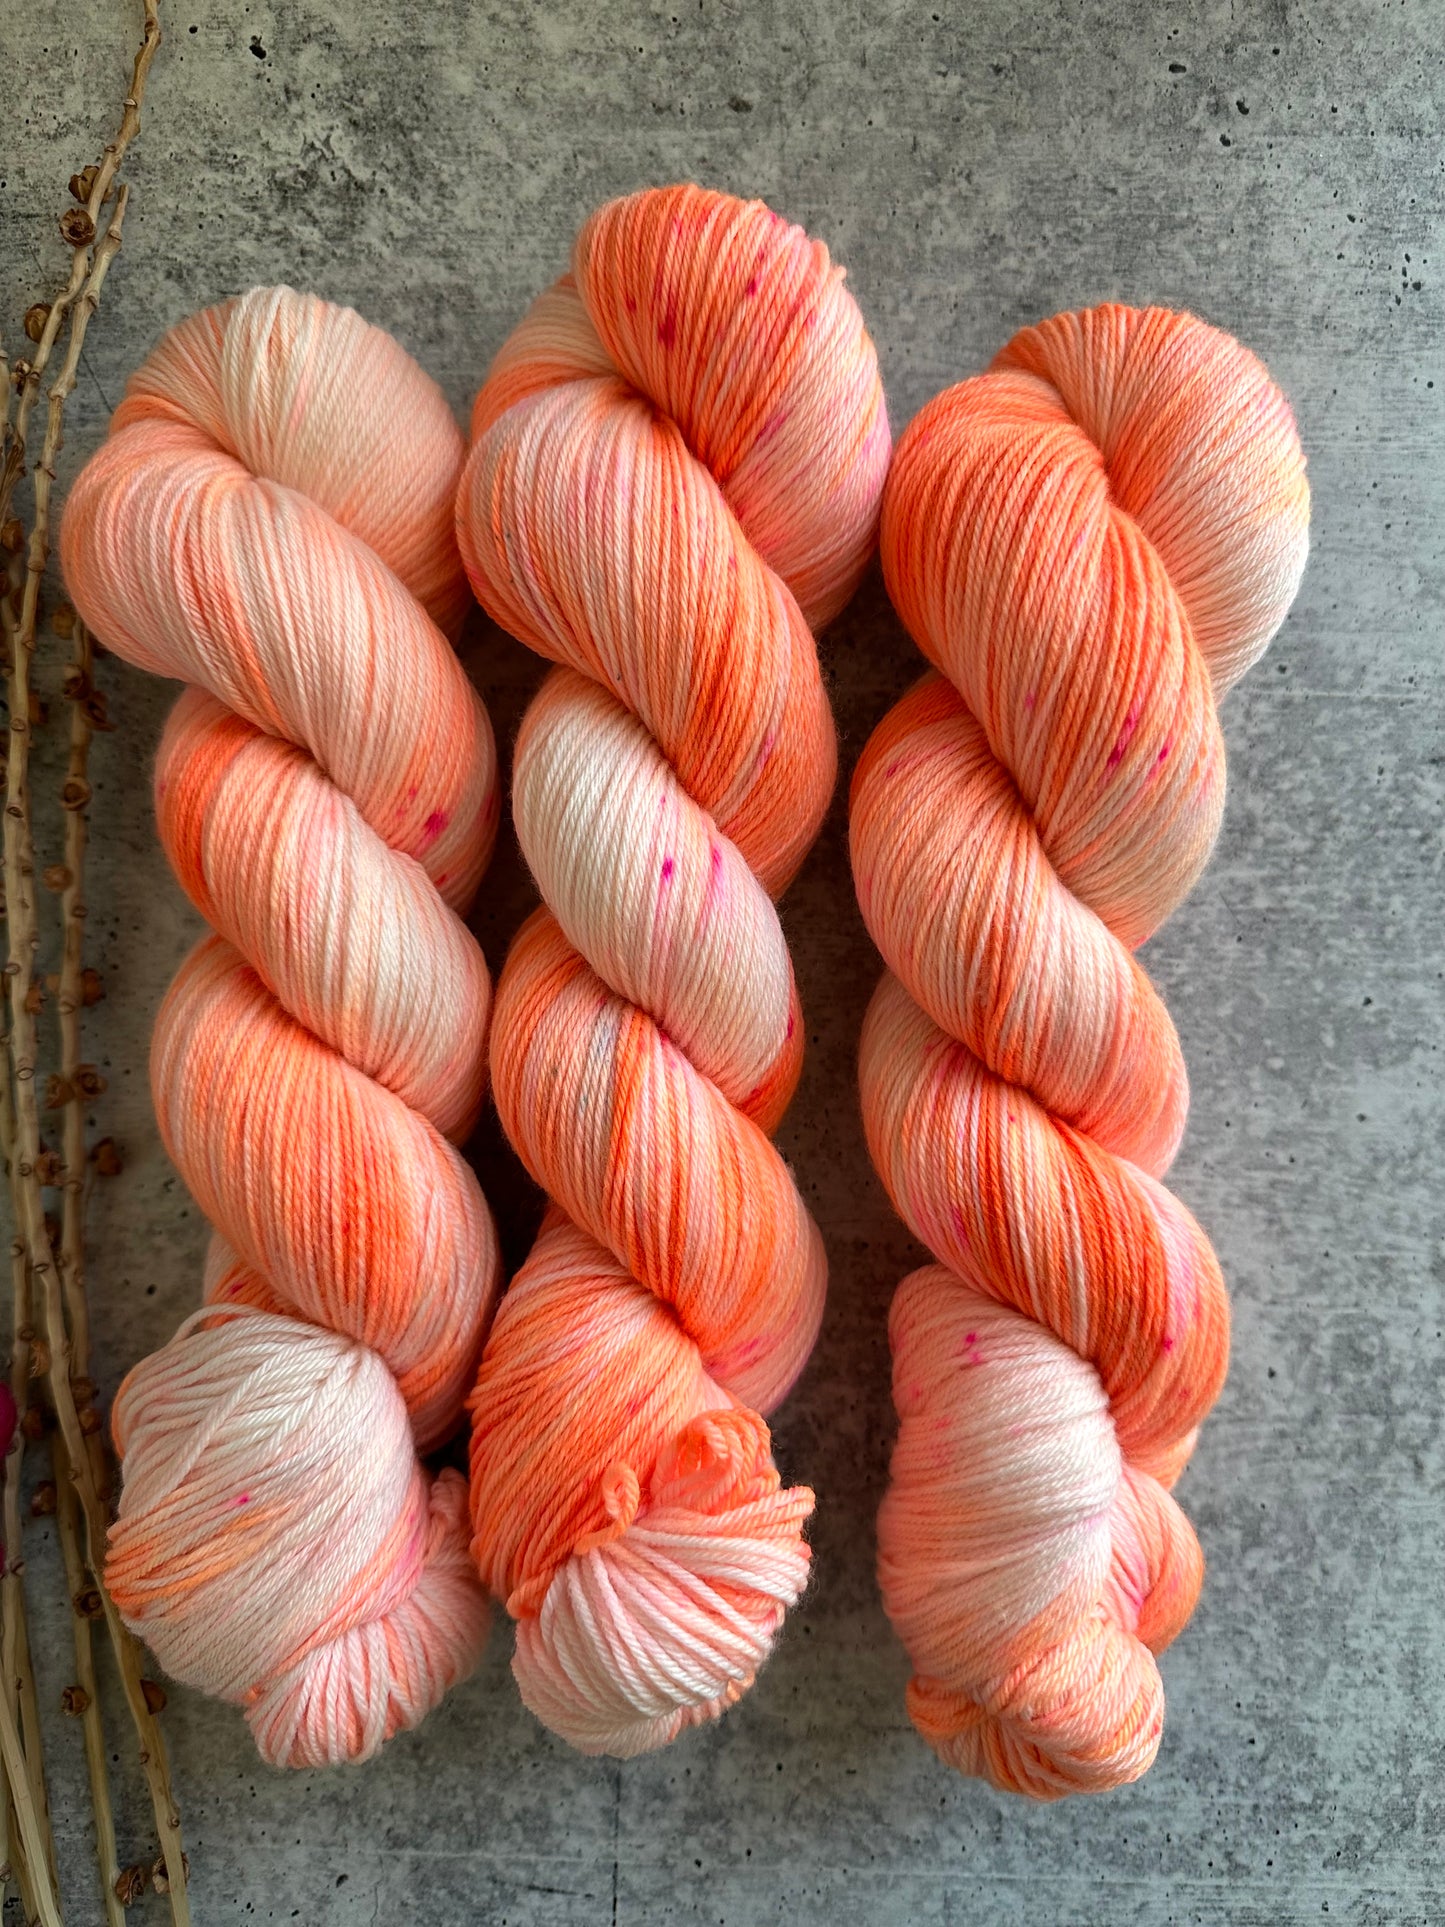 How Did I Know That? 100g Skein